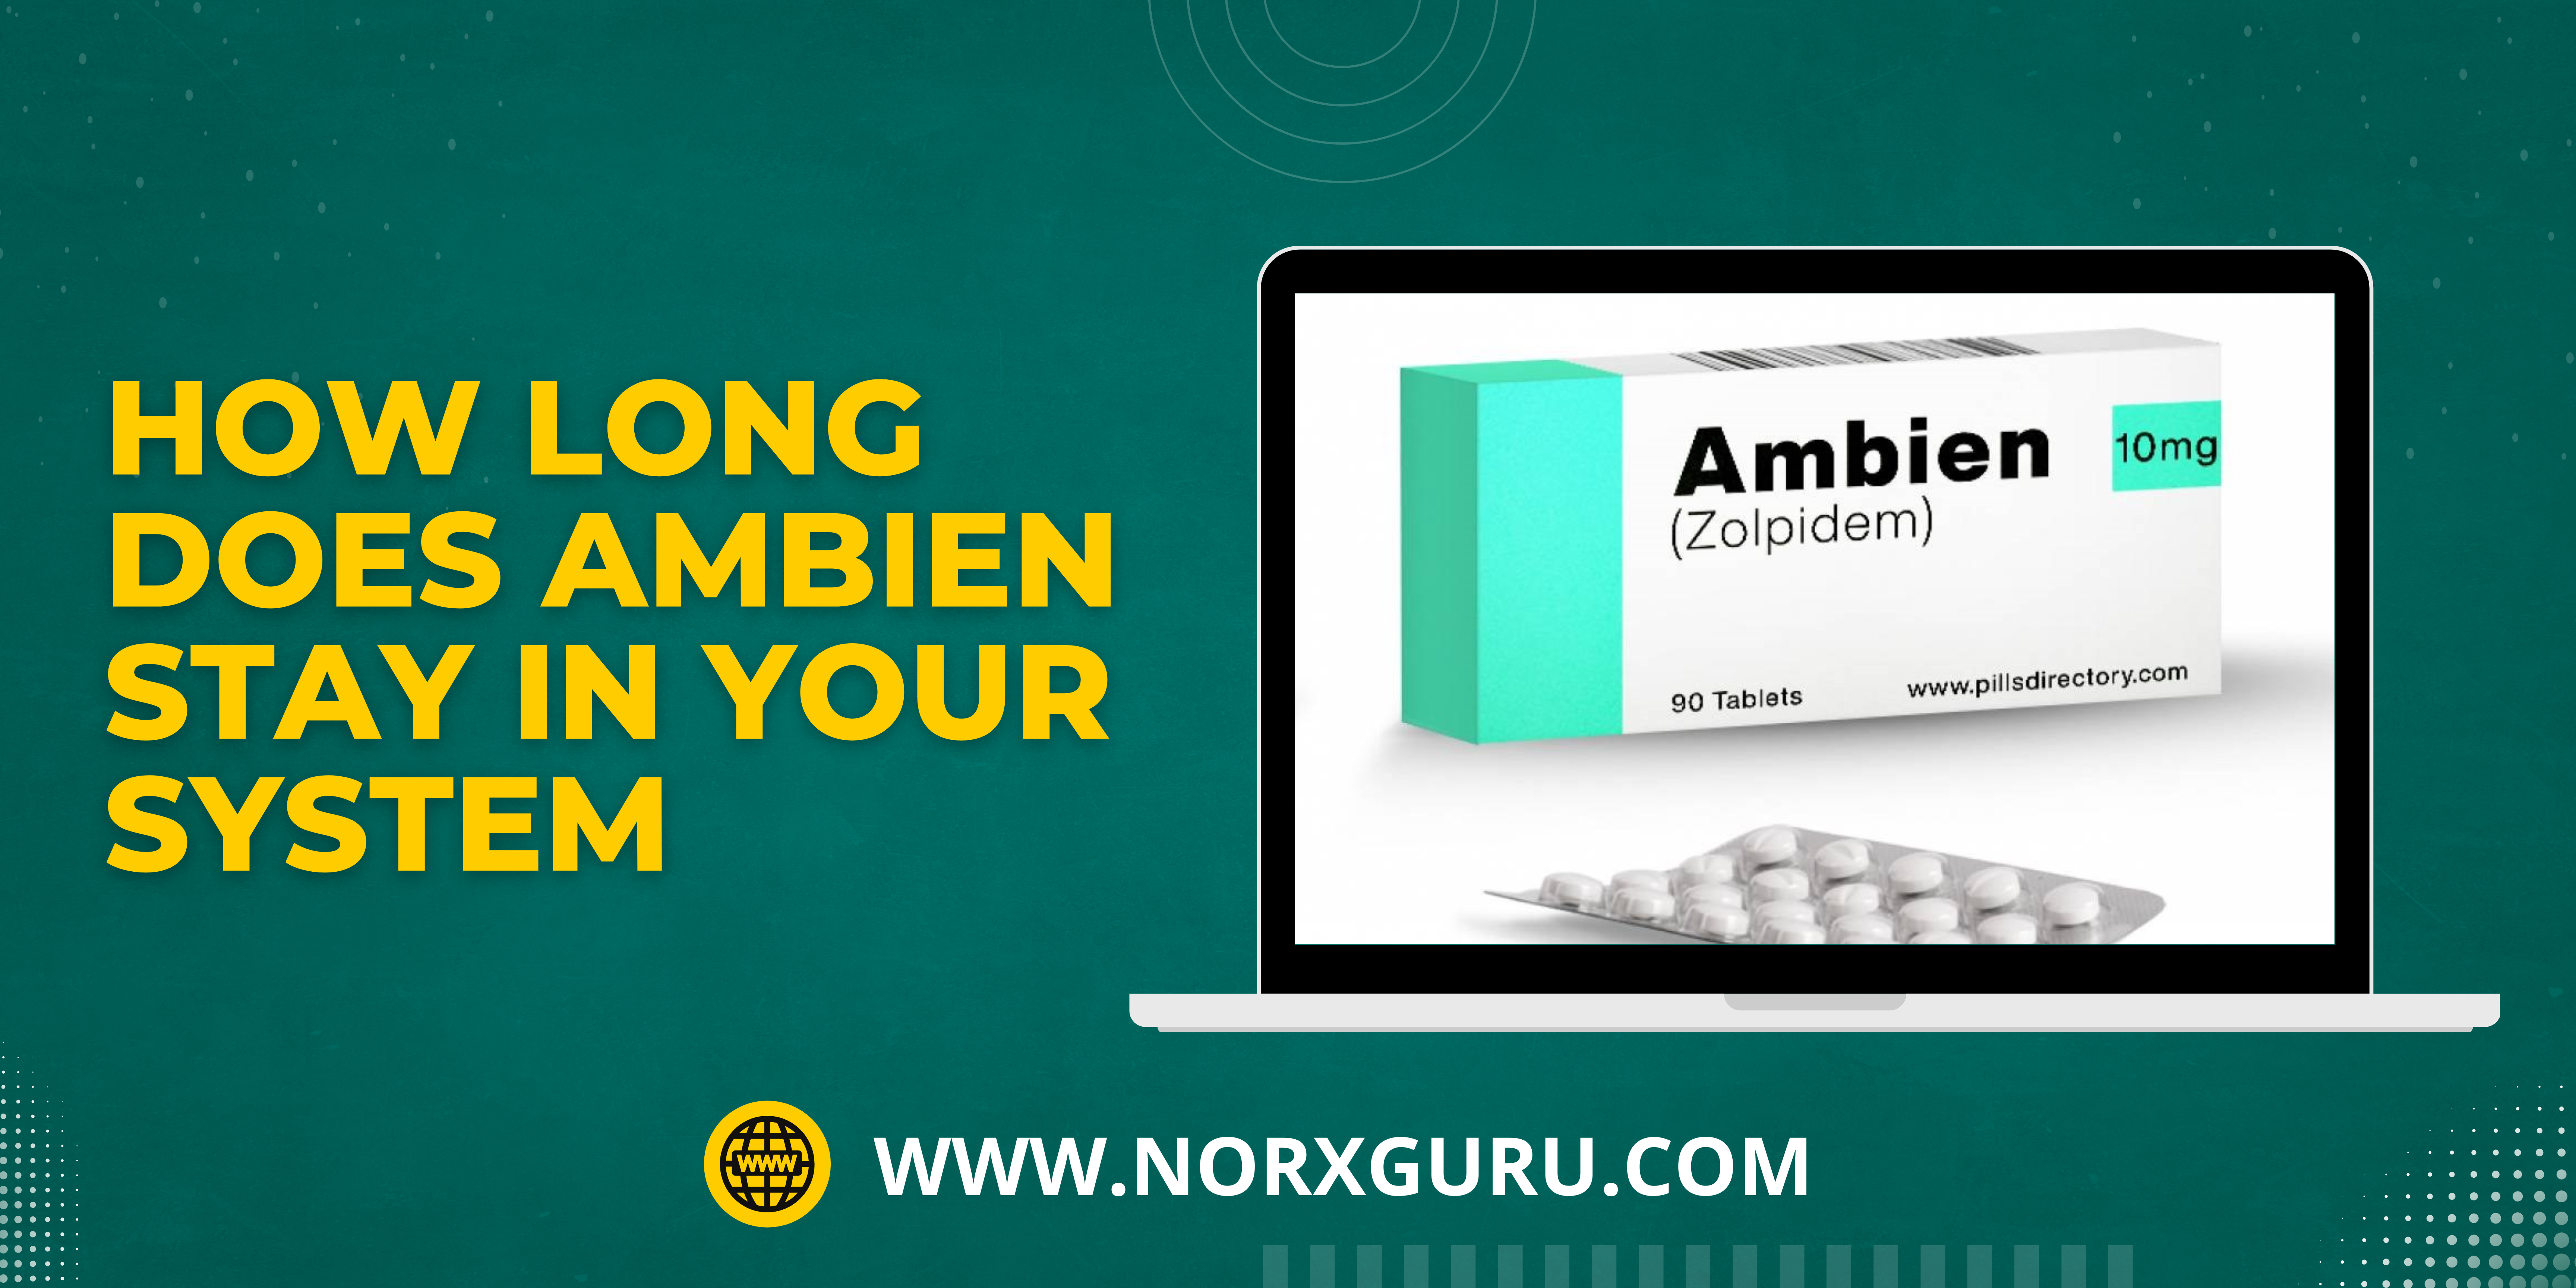 How long does Ambien stay in your system?